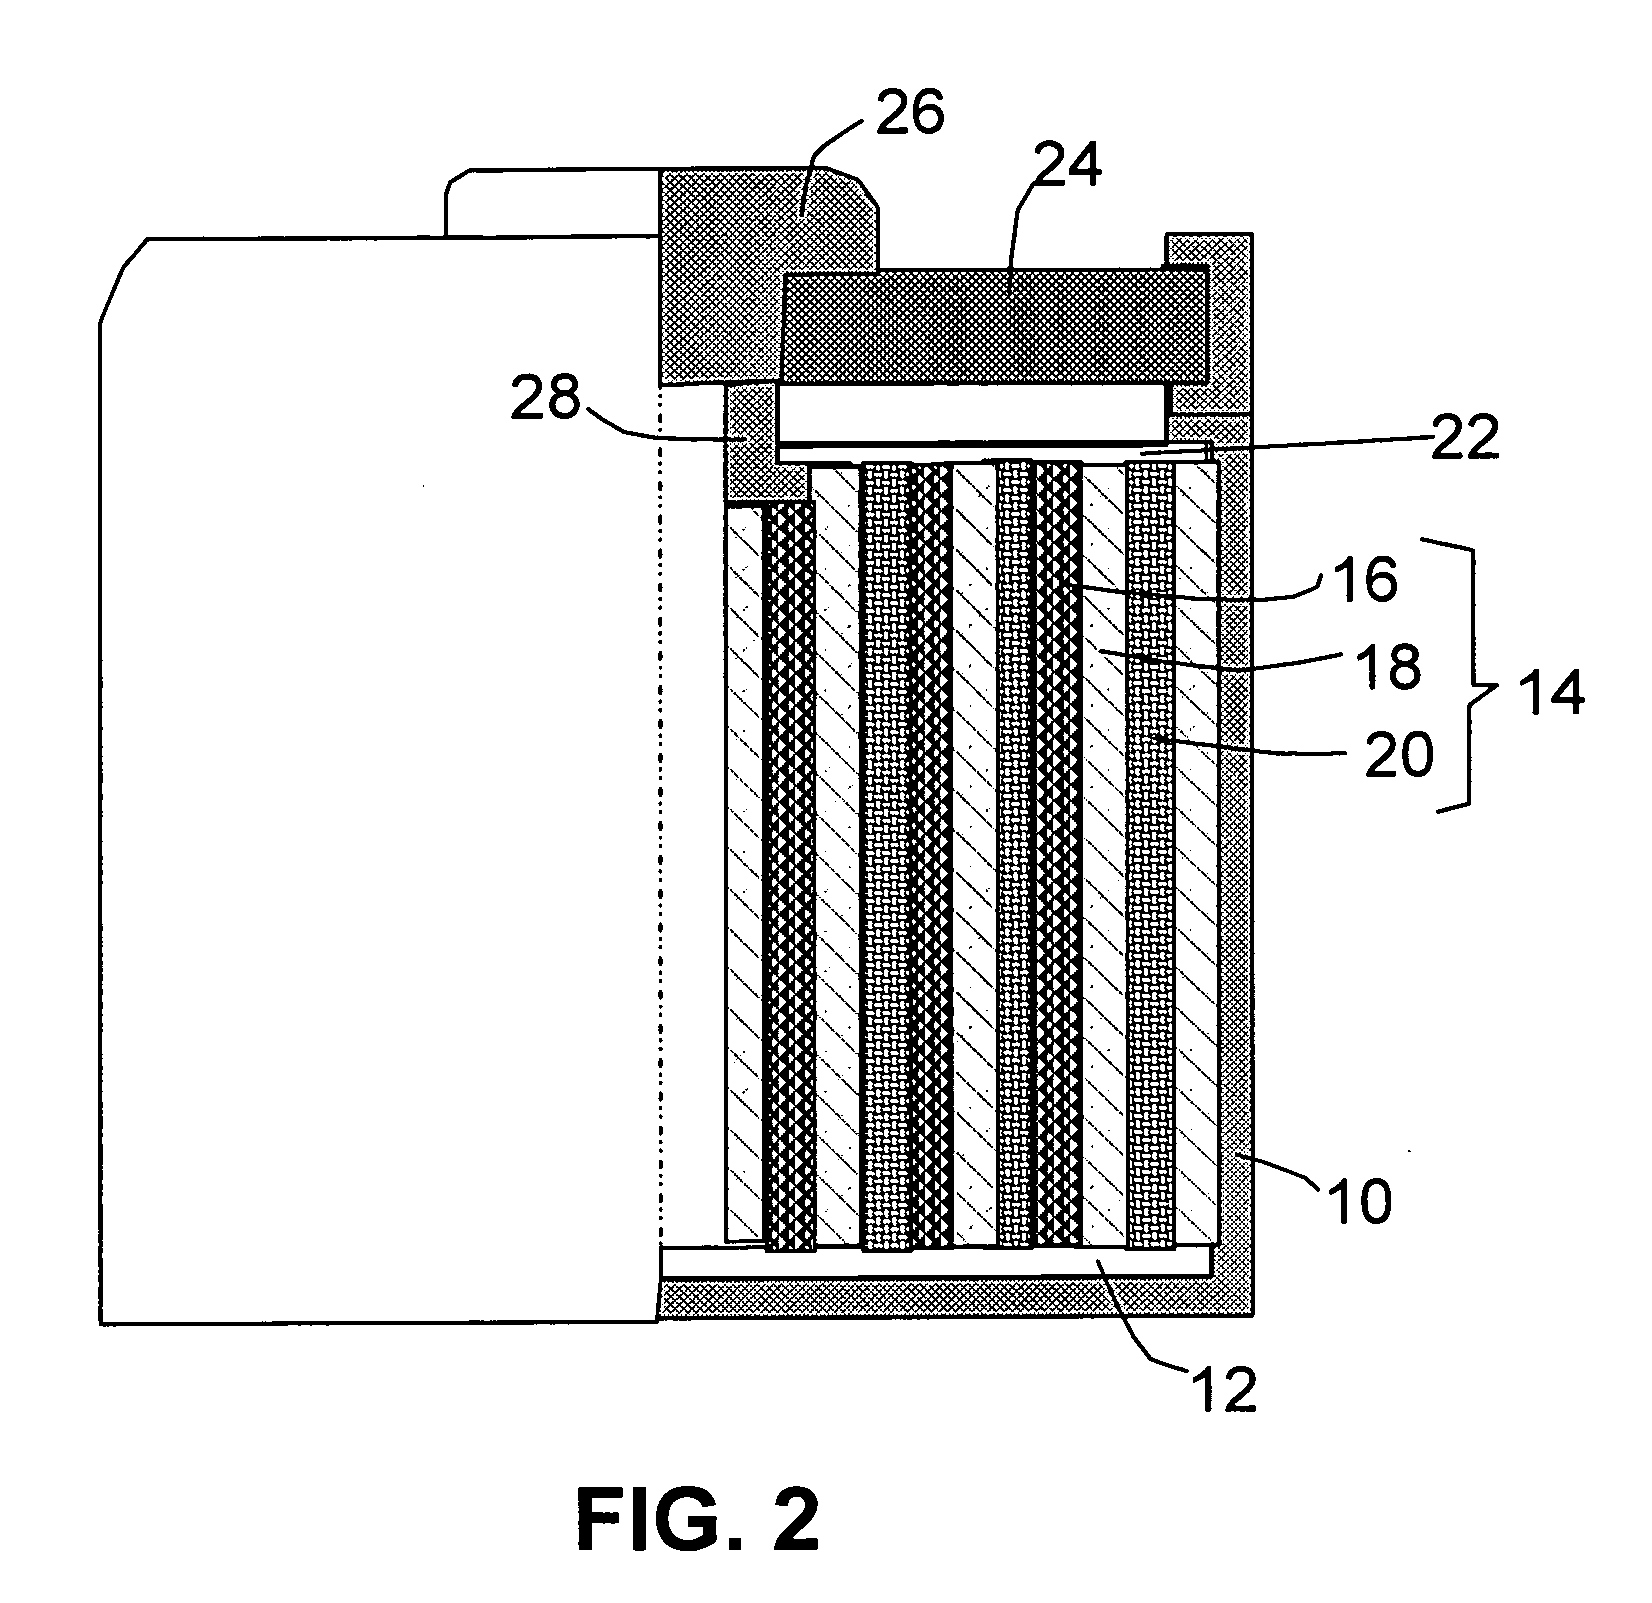 Method of producing hybrid nano-filament electrodes for lithium metal or lithium ion batteries